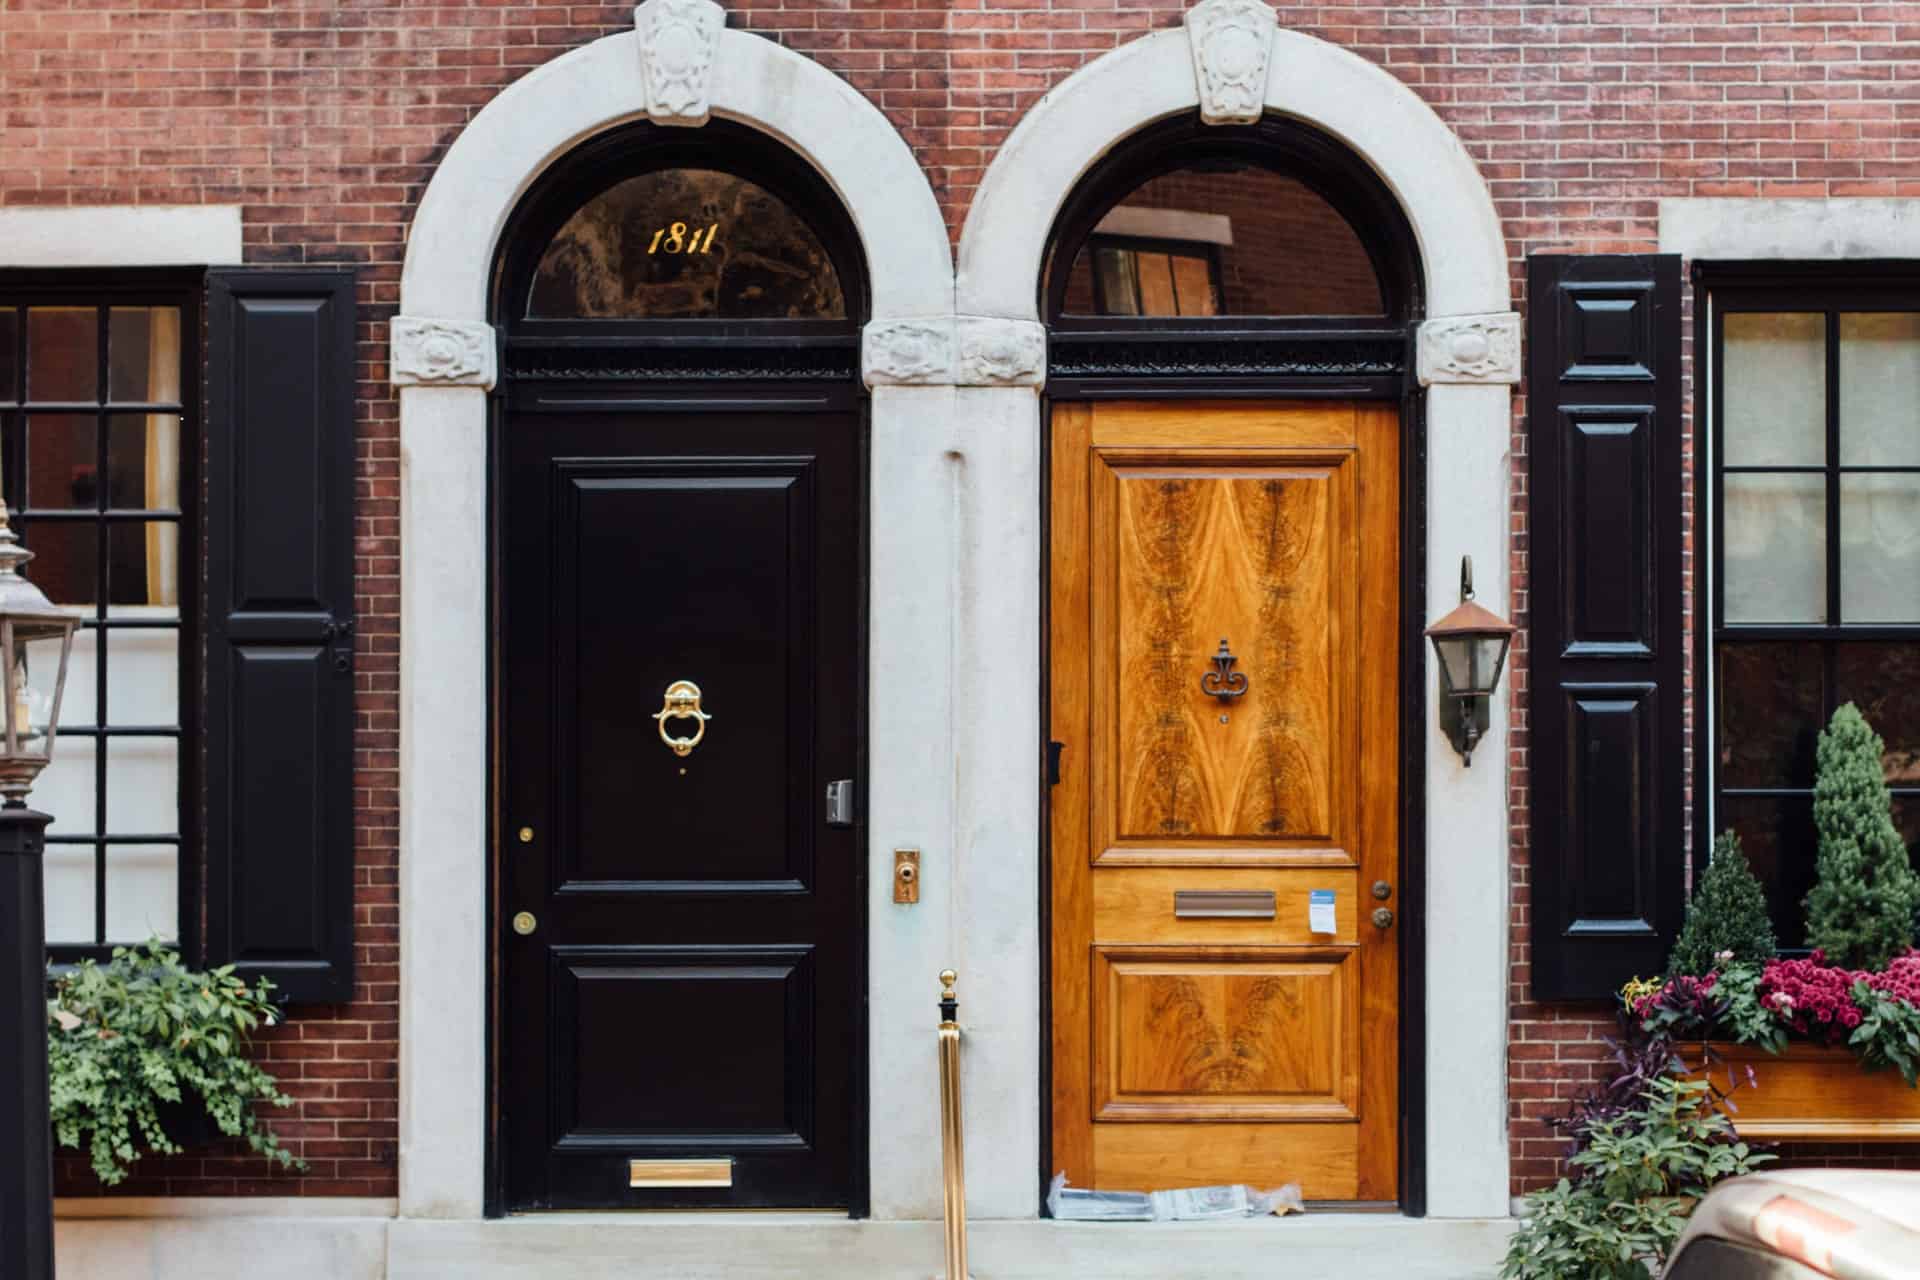 Flushless doors – where do they fit?